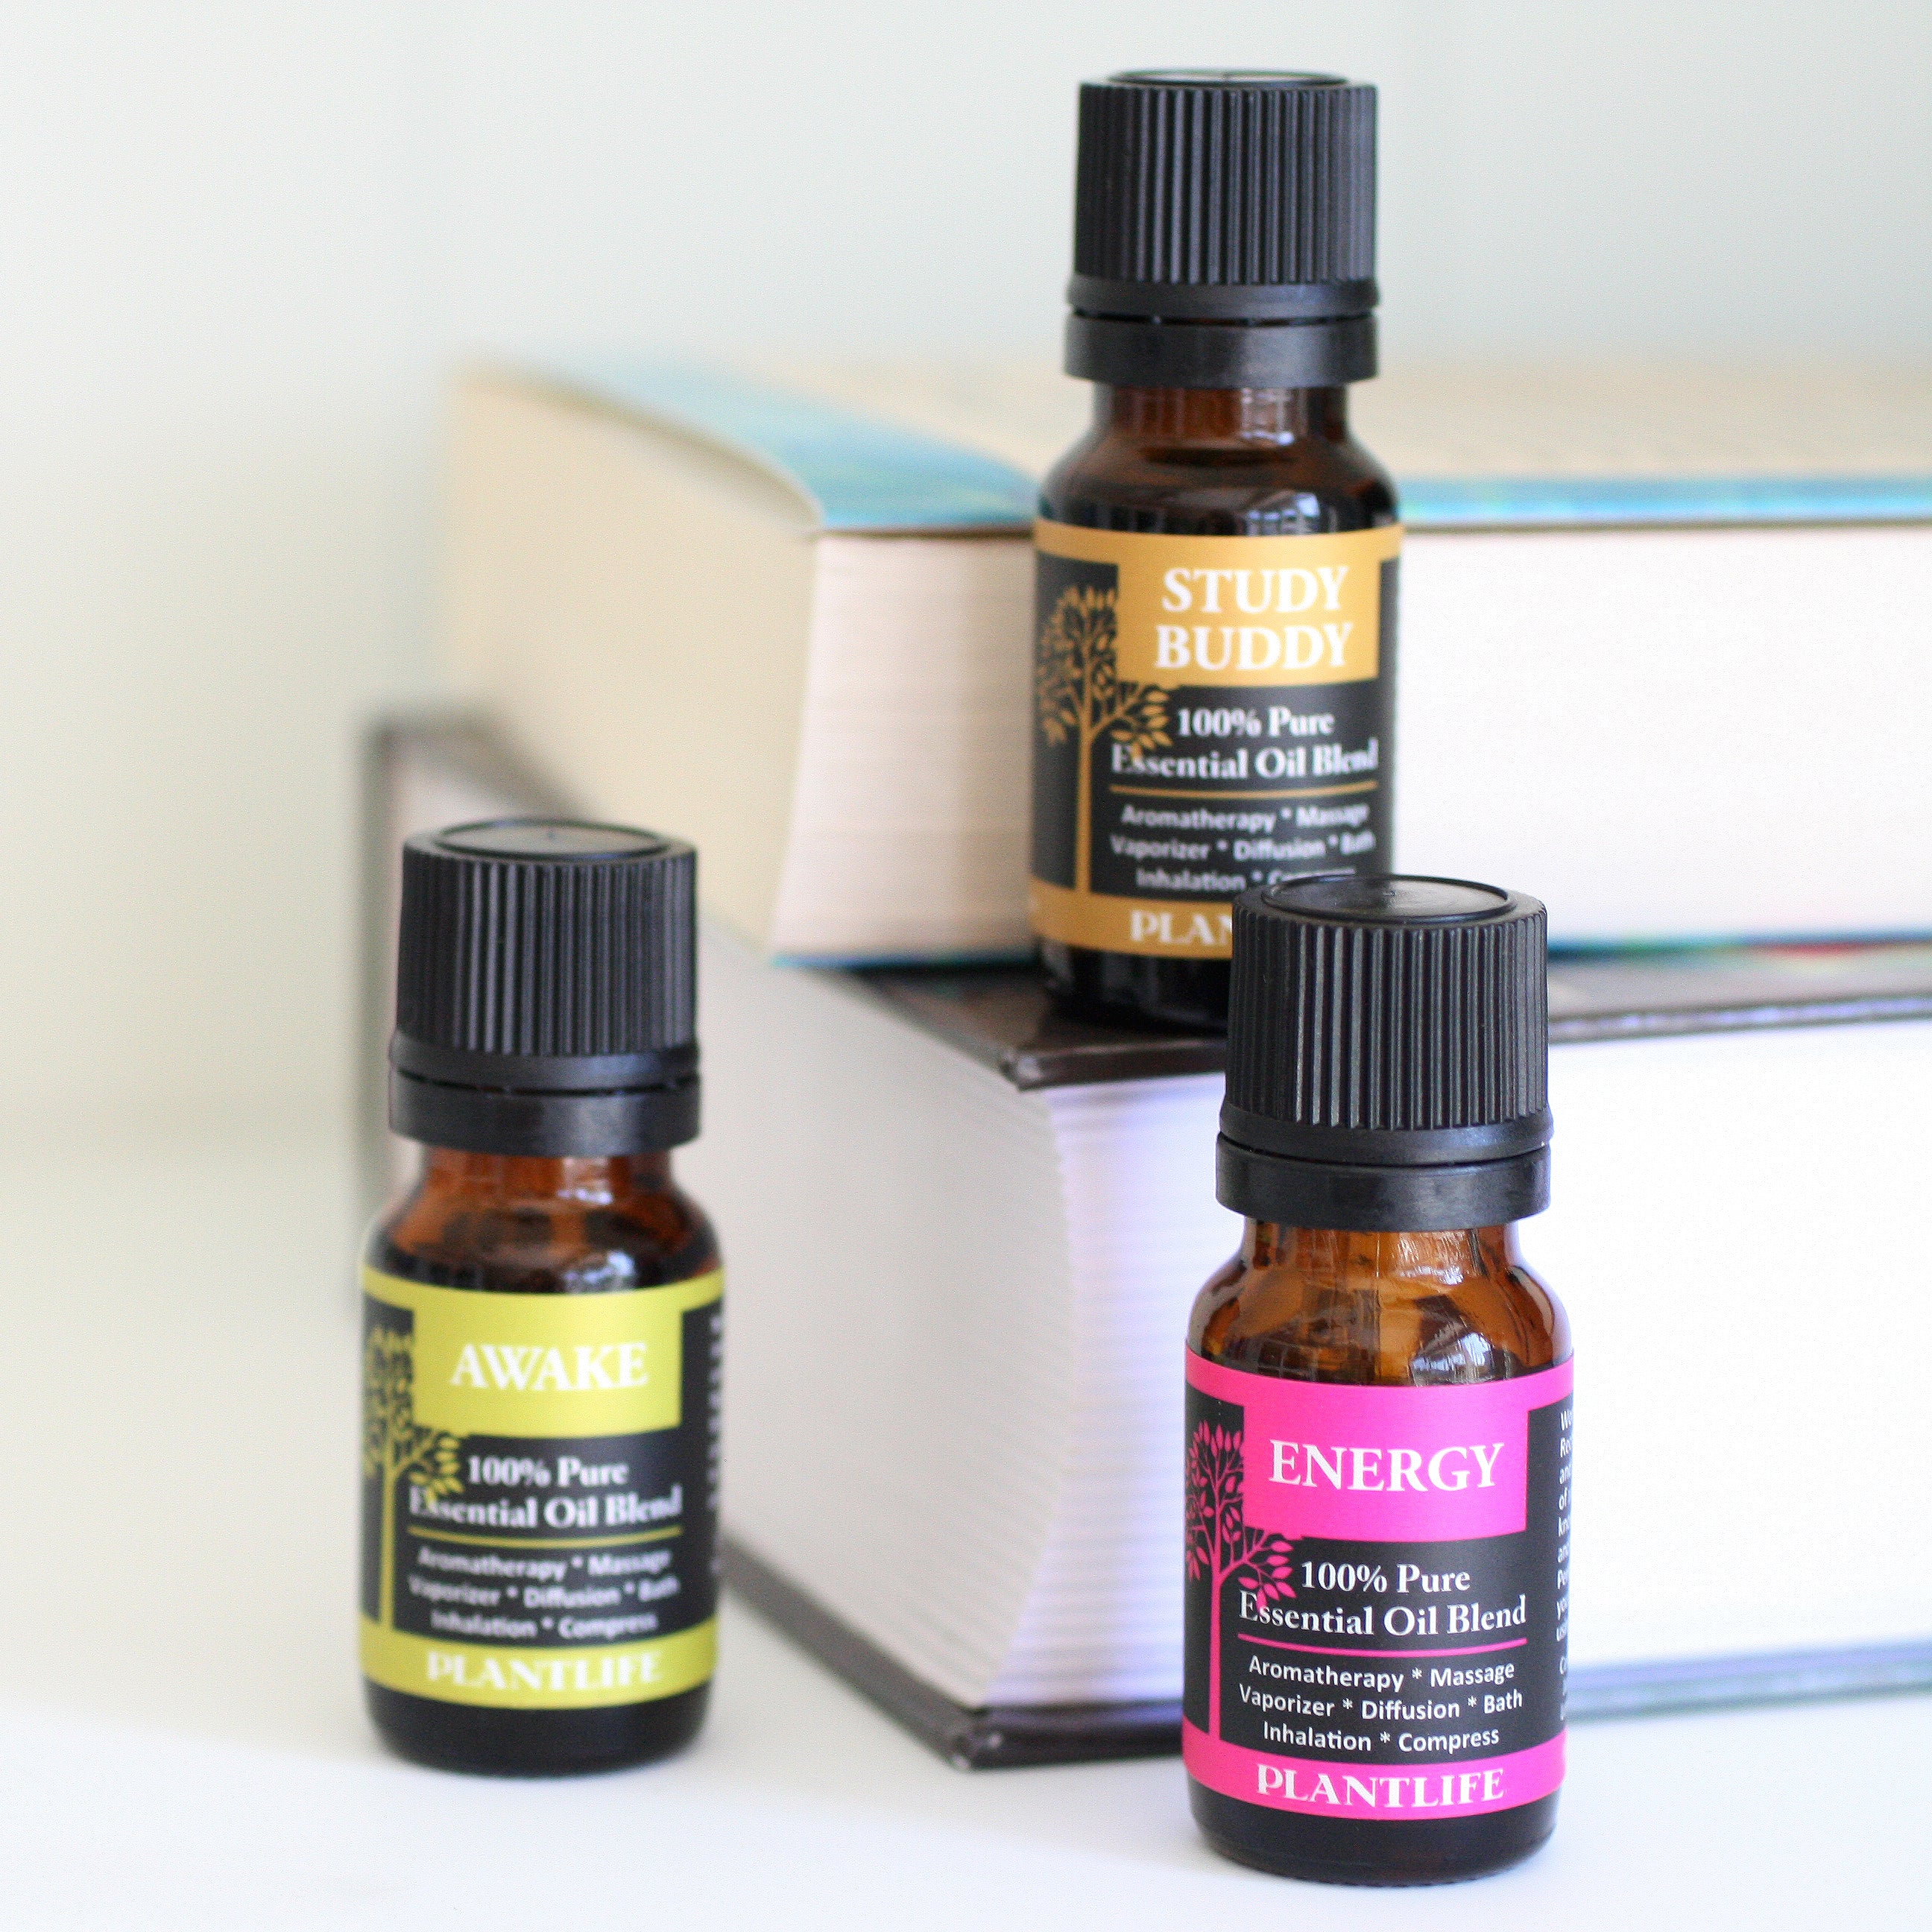 Podcast #7: How To Safely Use Essential Oils